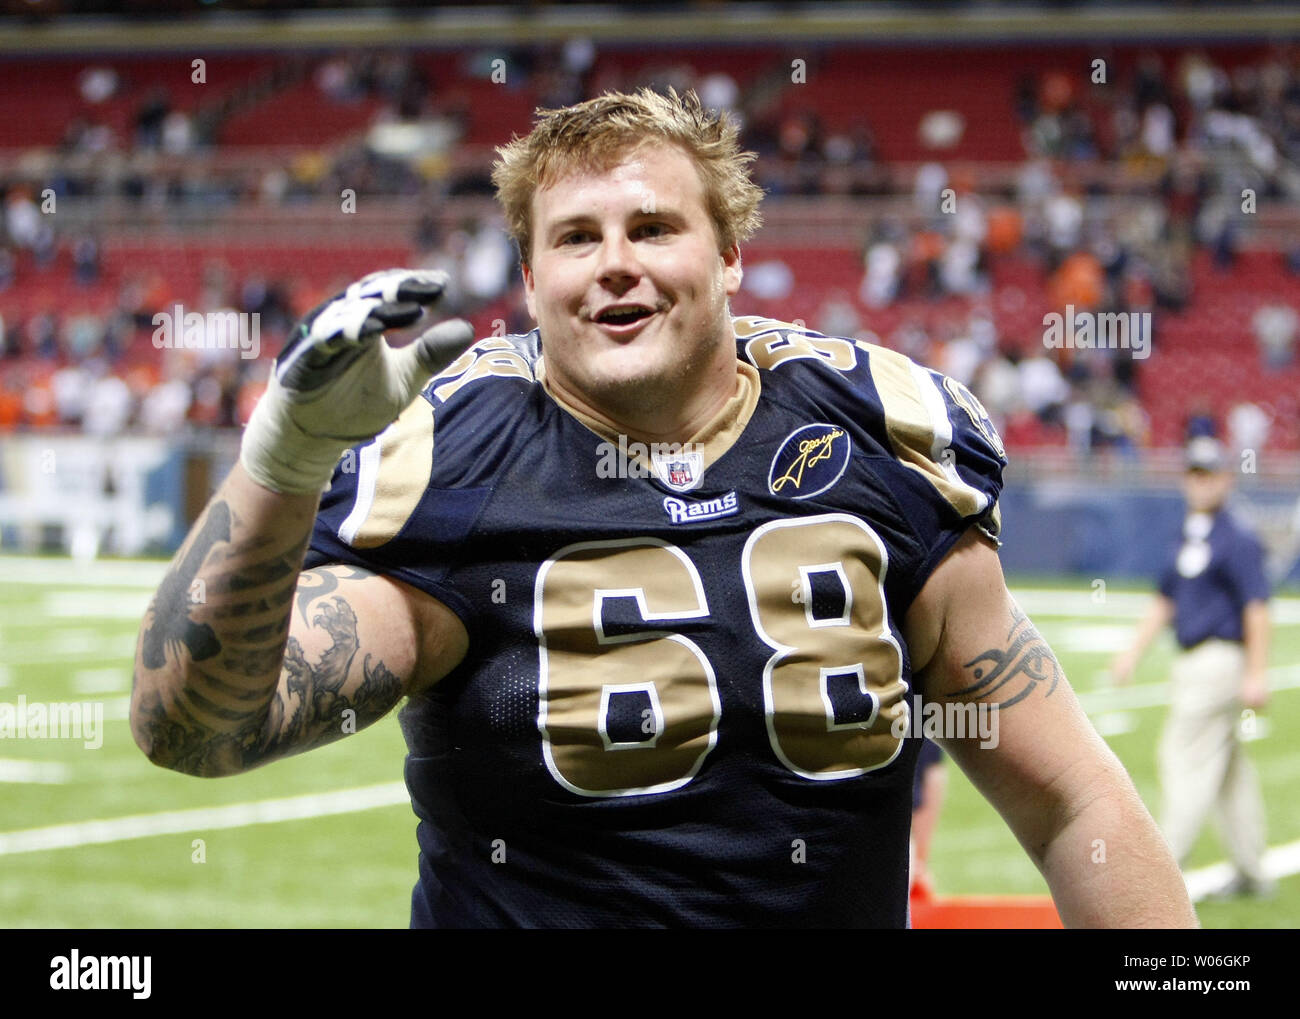 st-louis-rams-richie-incognito-who-was-critical-of-fan-support-during-the-practice-week-taunts-fans-while-being-booed-as-he-leaves-the-field-after-losing-to-the-chicago-bears-27-3-at-the-edward-jones-dome-in-st-louis-on-november-23-2008-upi-photobill-greenblatt-W06GKP.jpg